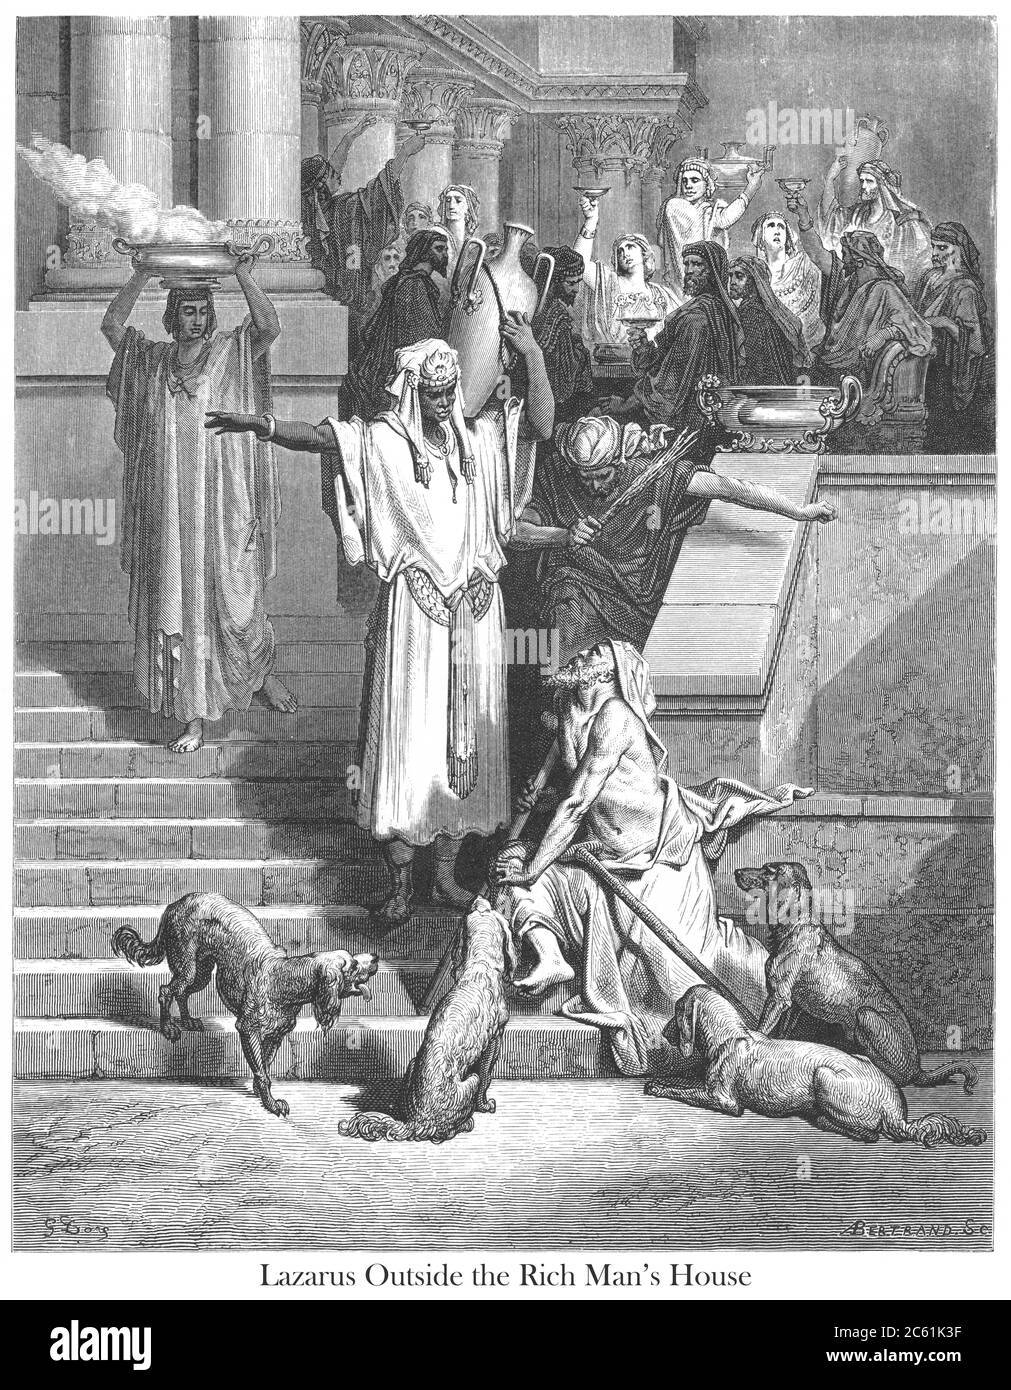 Lazarus at the Rich Man's House [Luke 16:20-21] From the book 'Bible Gallery' Illustrated by Gustave Dore with Memoir of Dore and Descriptive Letter-press by Talbot W. Chambers D.D. Published by Cassell & Company Limited in London and simultaneously by Mame in Tours, France in 1866 Stock Photo